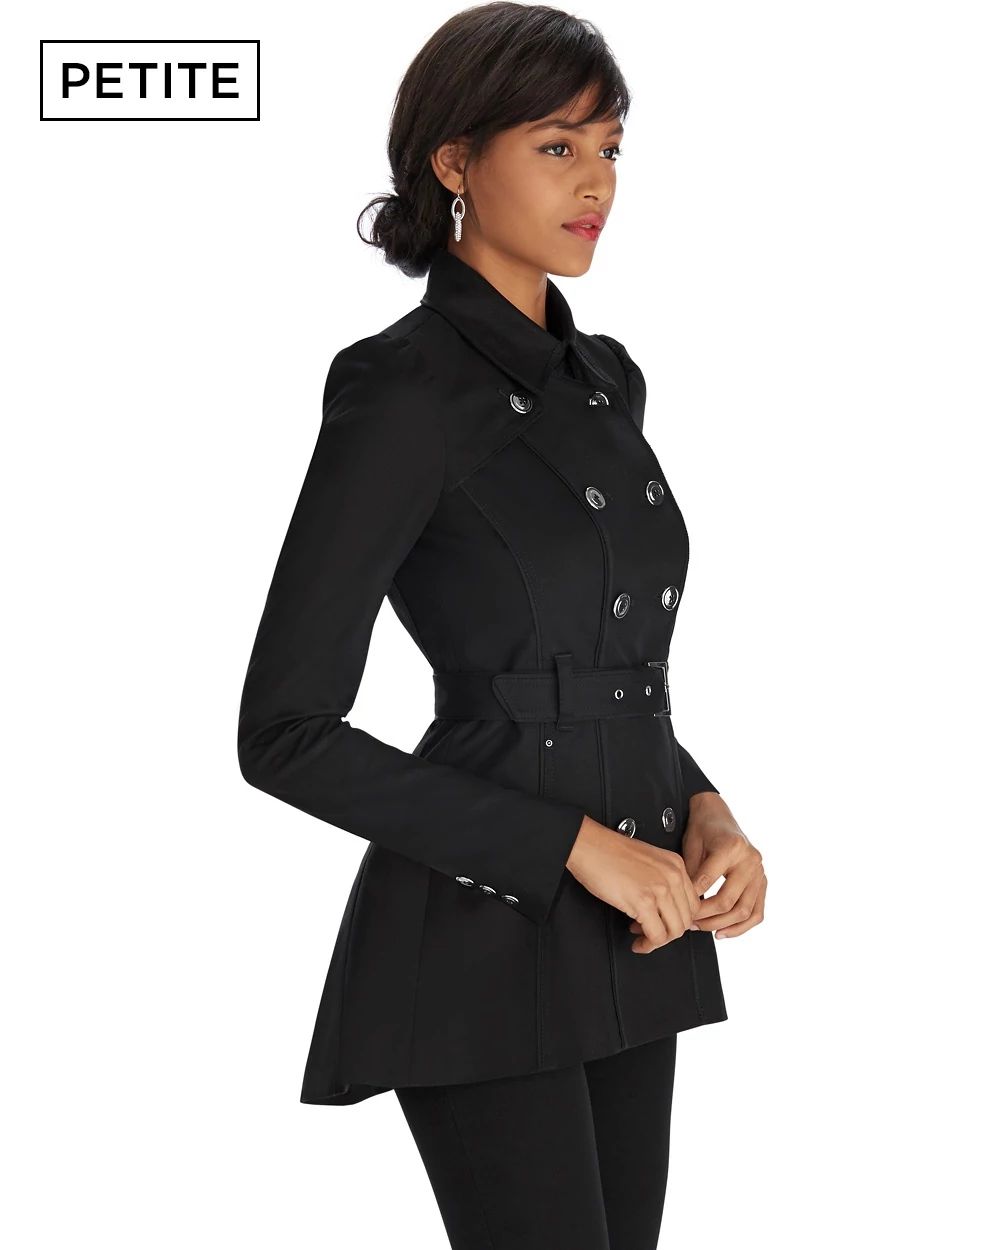 Petite Black Short Trench Coat click to view larger image.